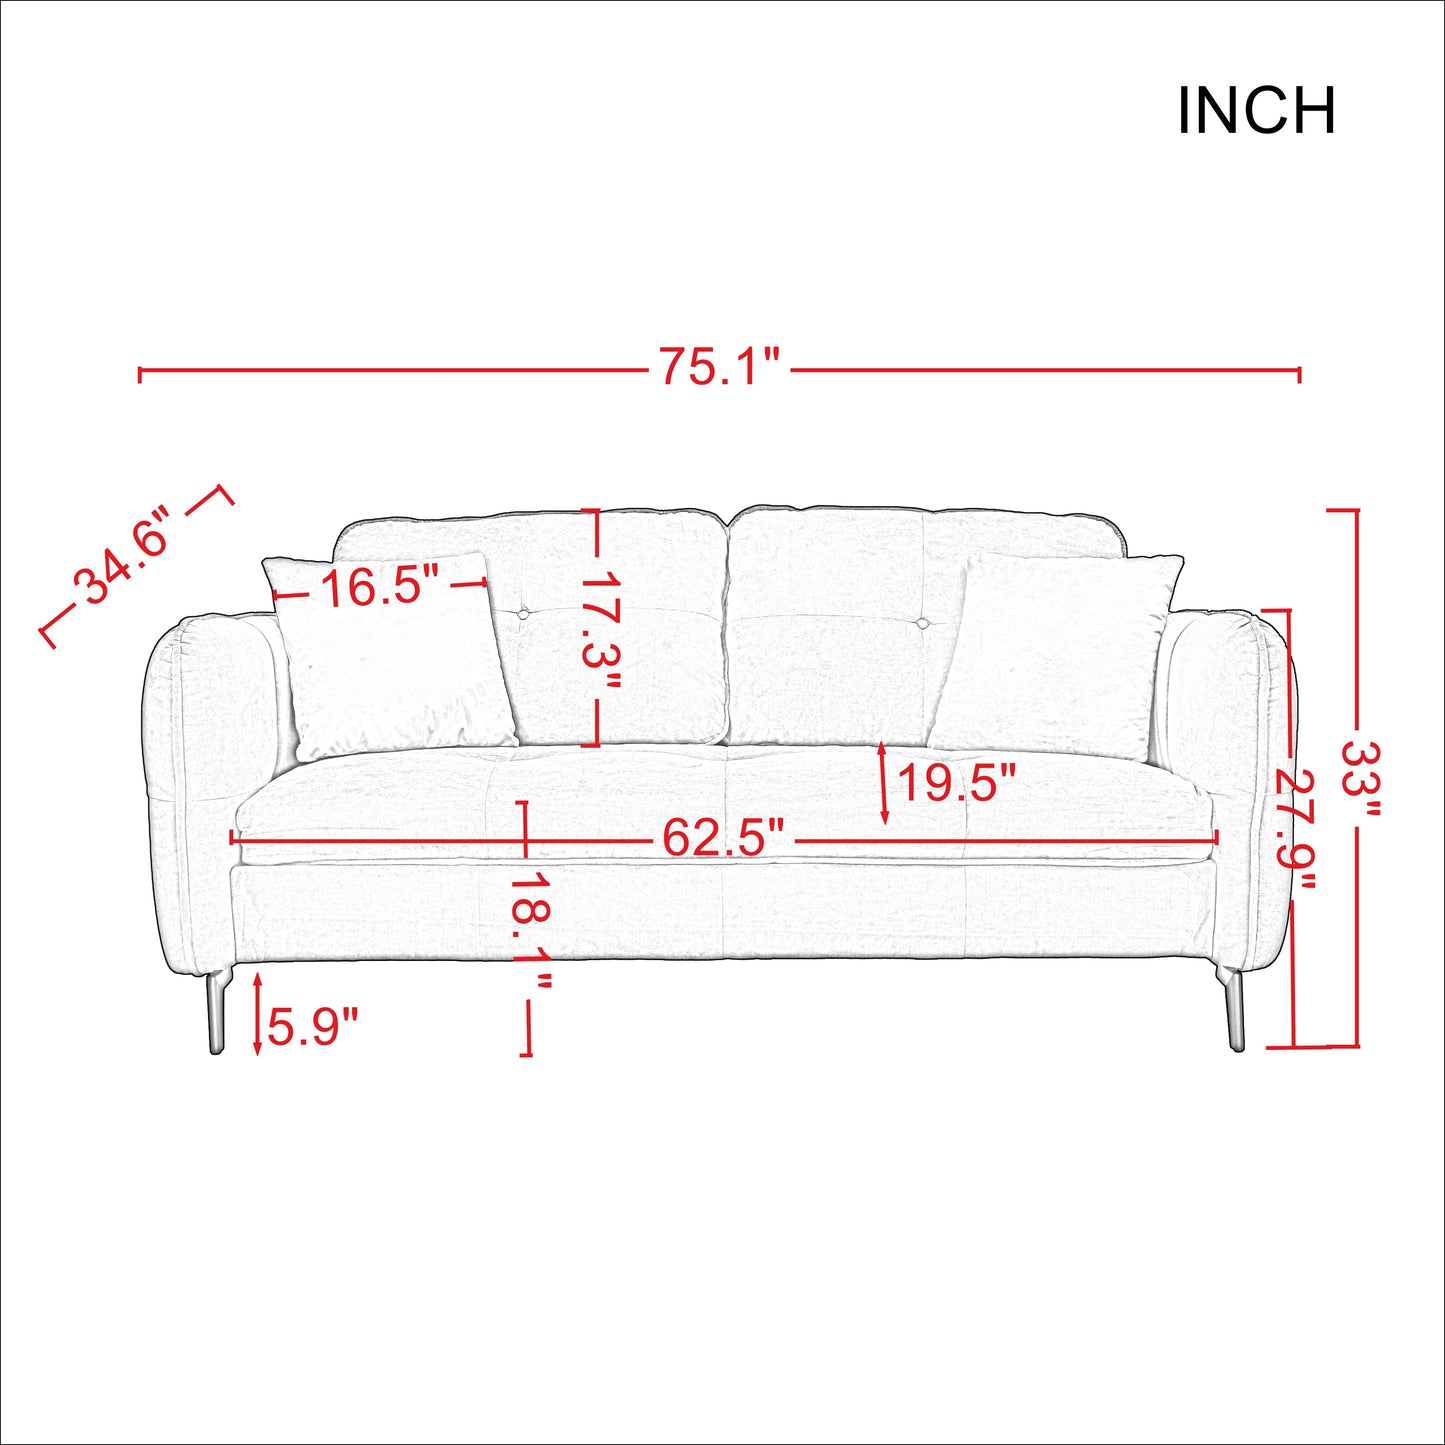 3-seater simple style  sofa